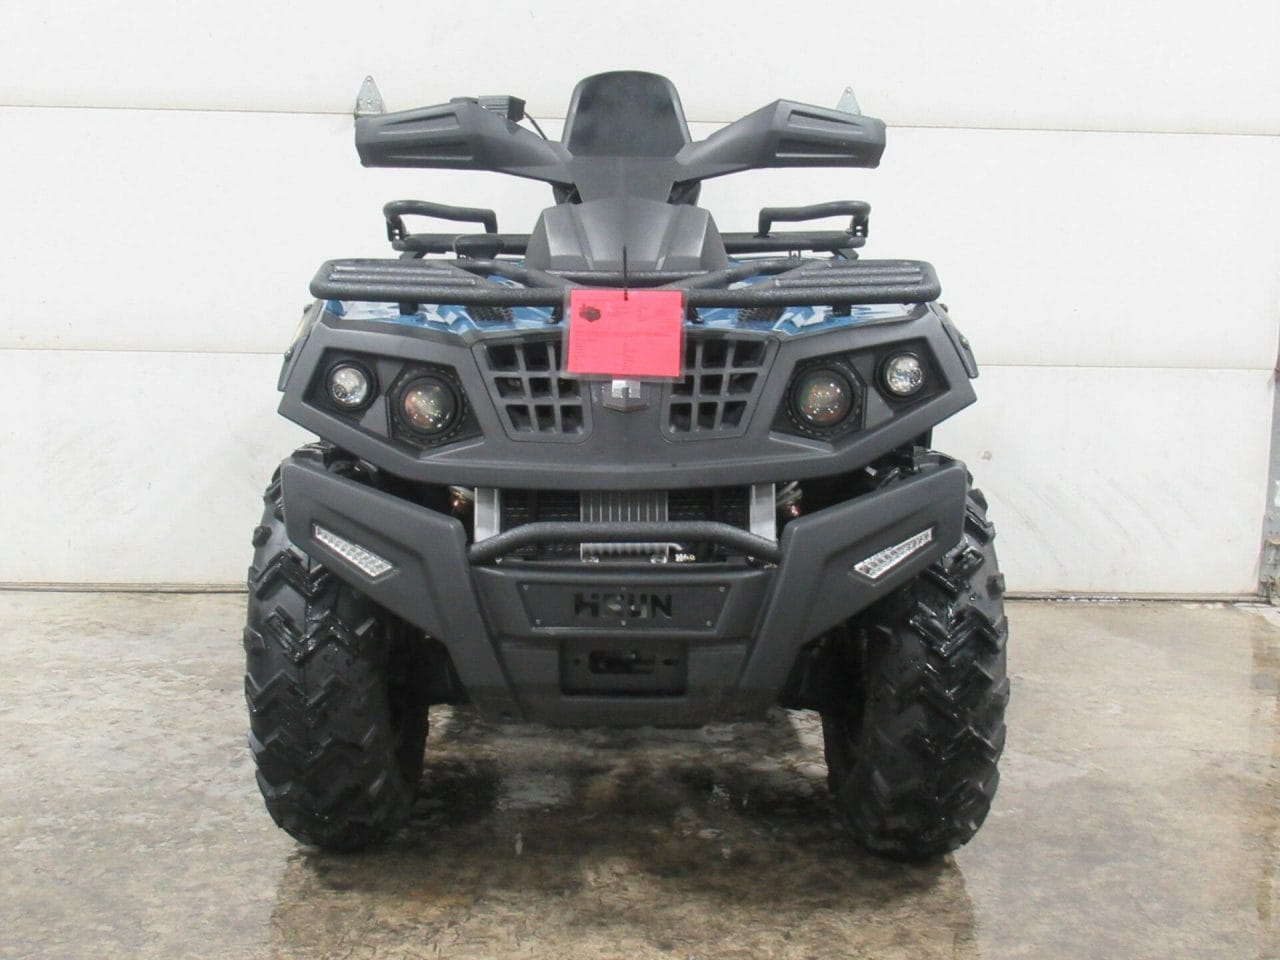 2022 Hisun Tactic 400 2-up 4×4 * New * Come with 2 Year Warranty’s * Payments Starting $130 a Month OAC *